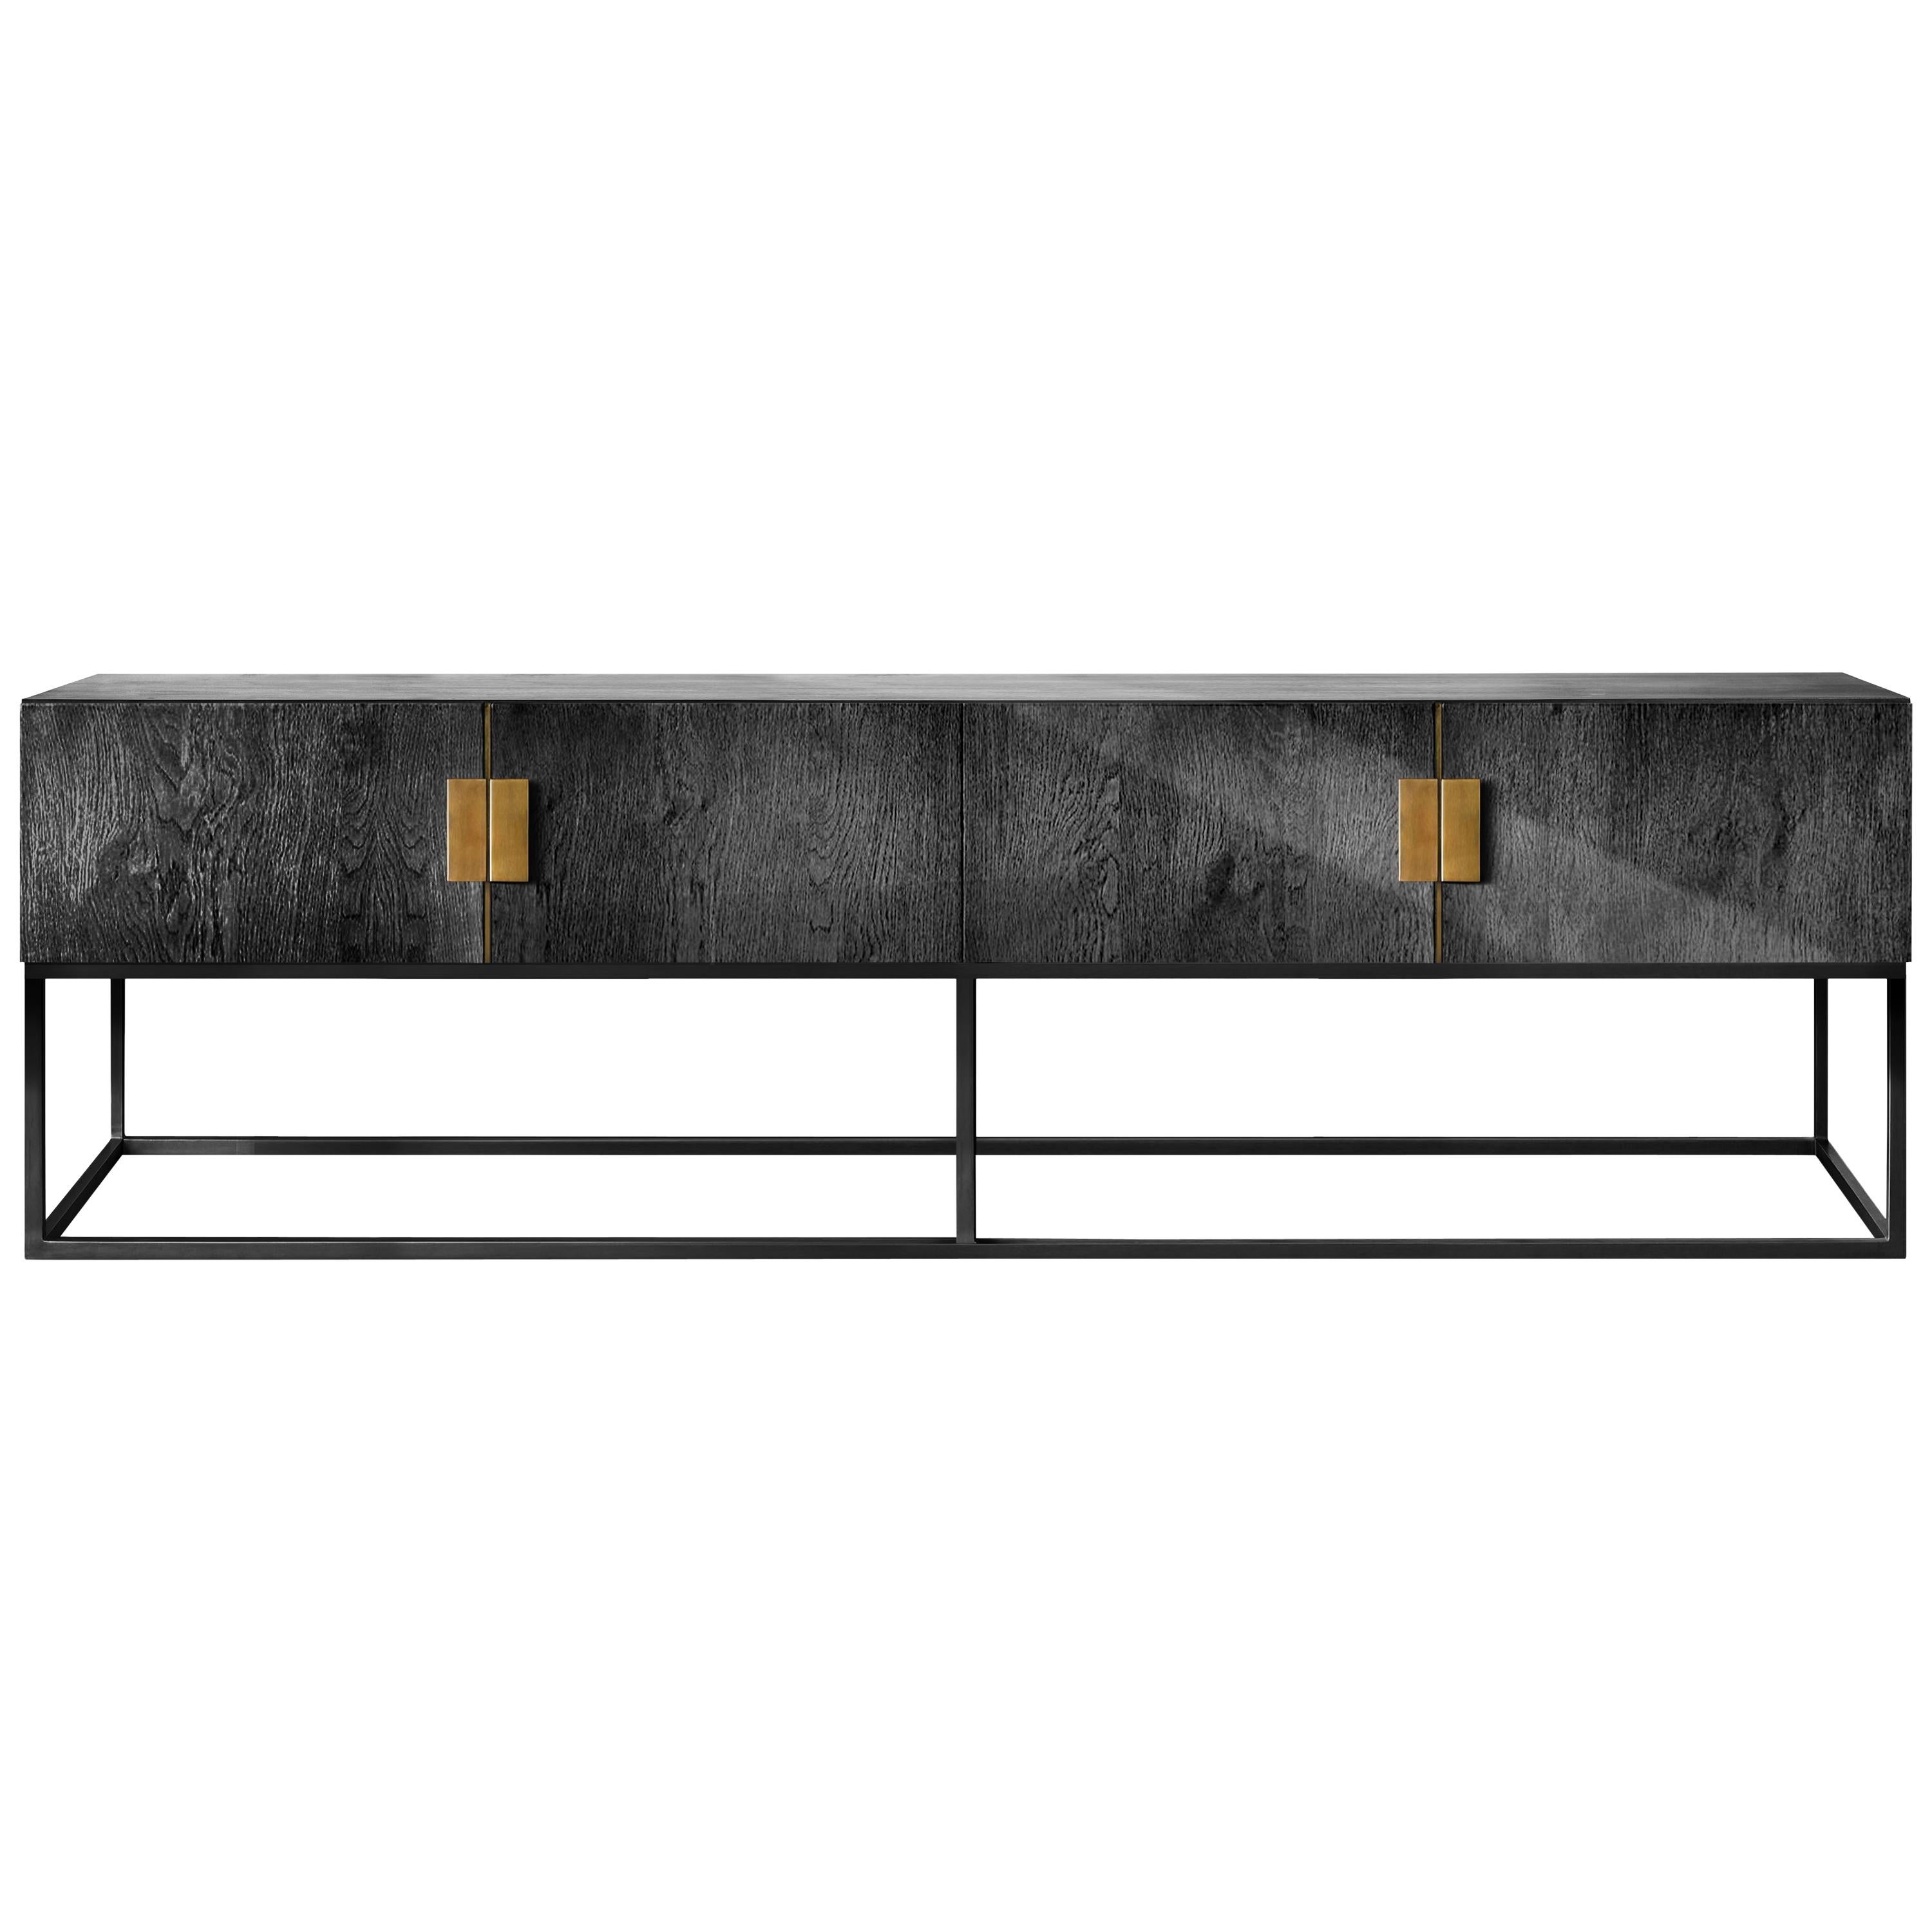 Contemporary Norse Console Table or Sideboard in Black Ash, Brass